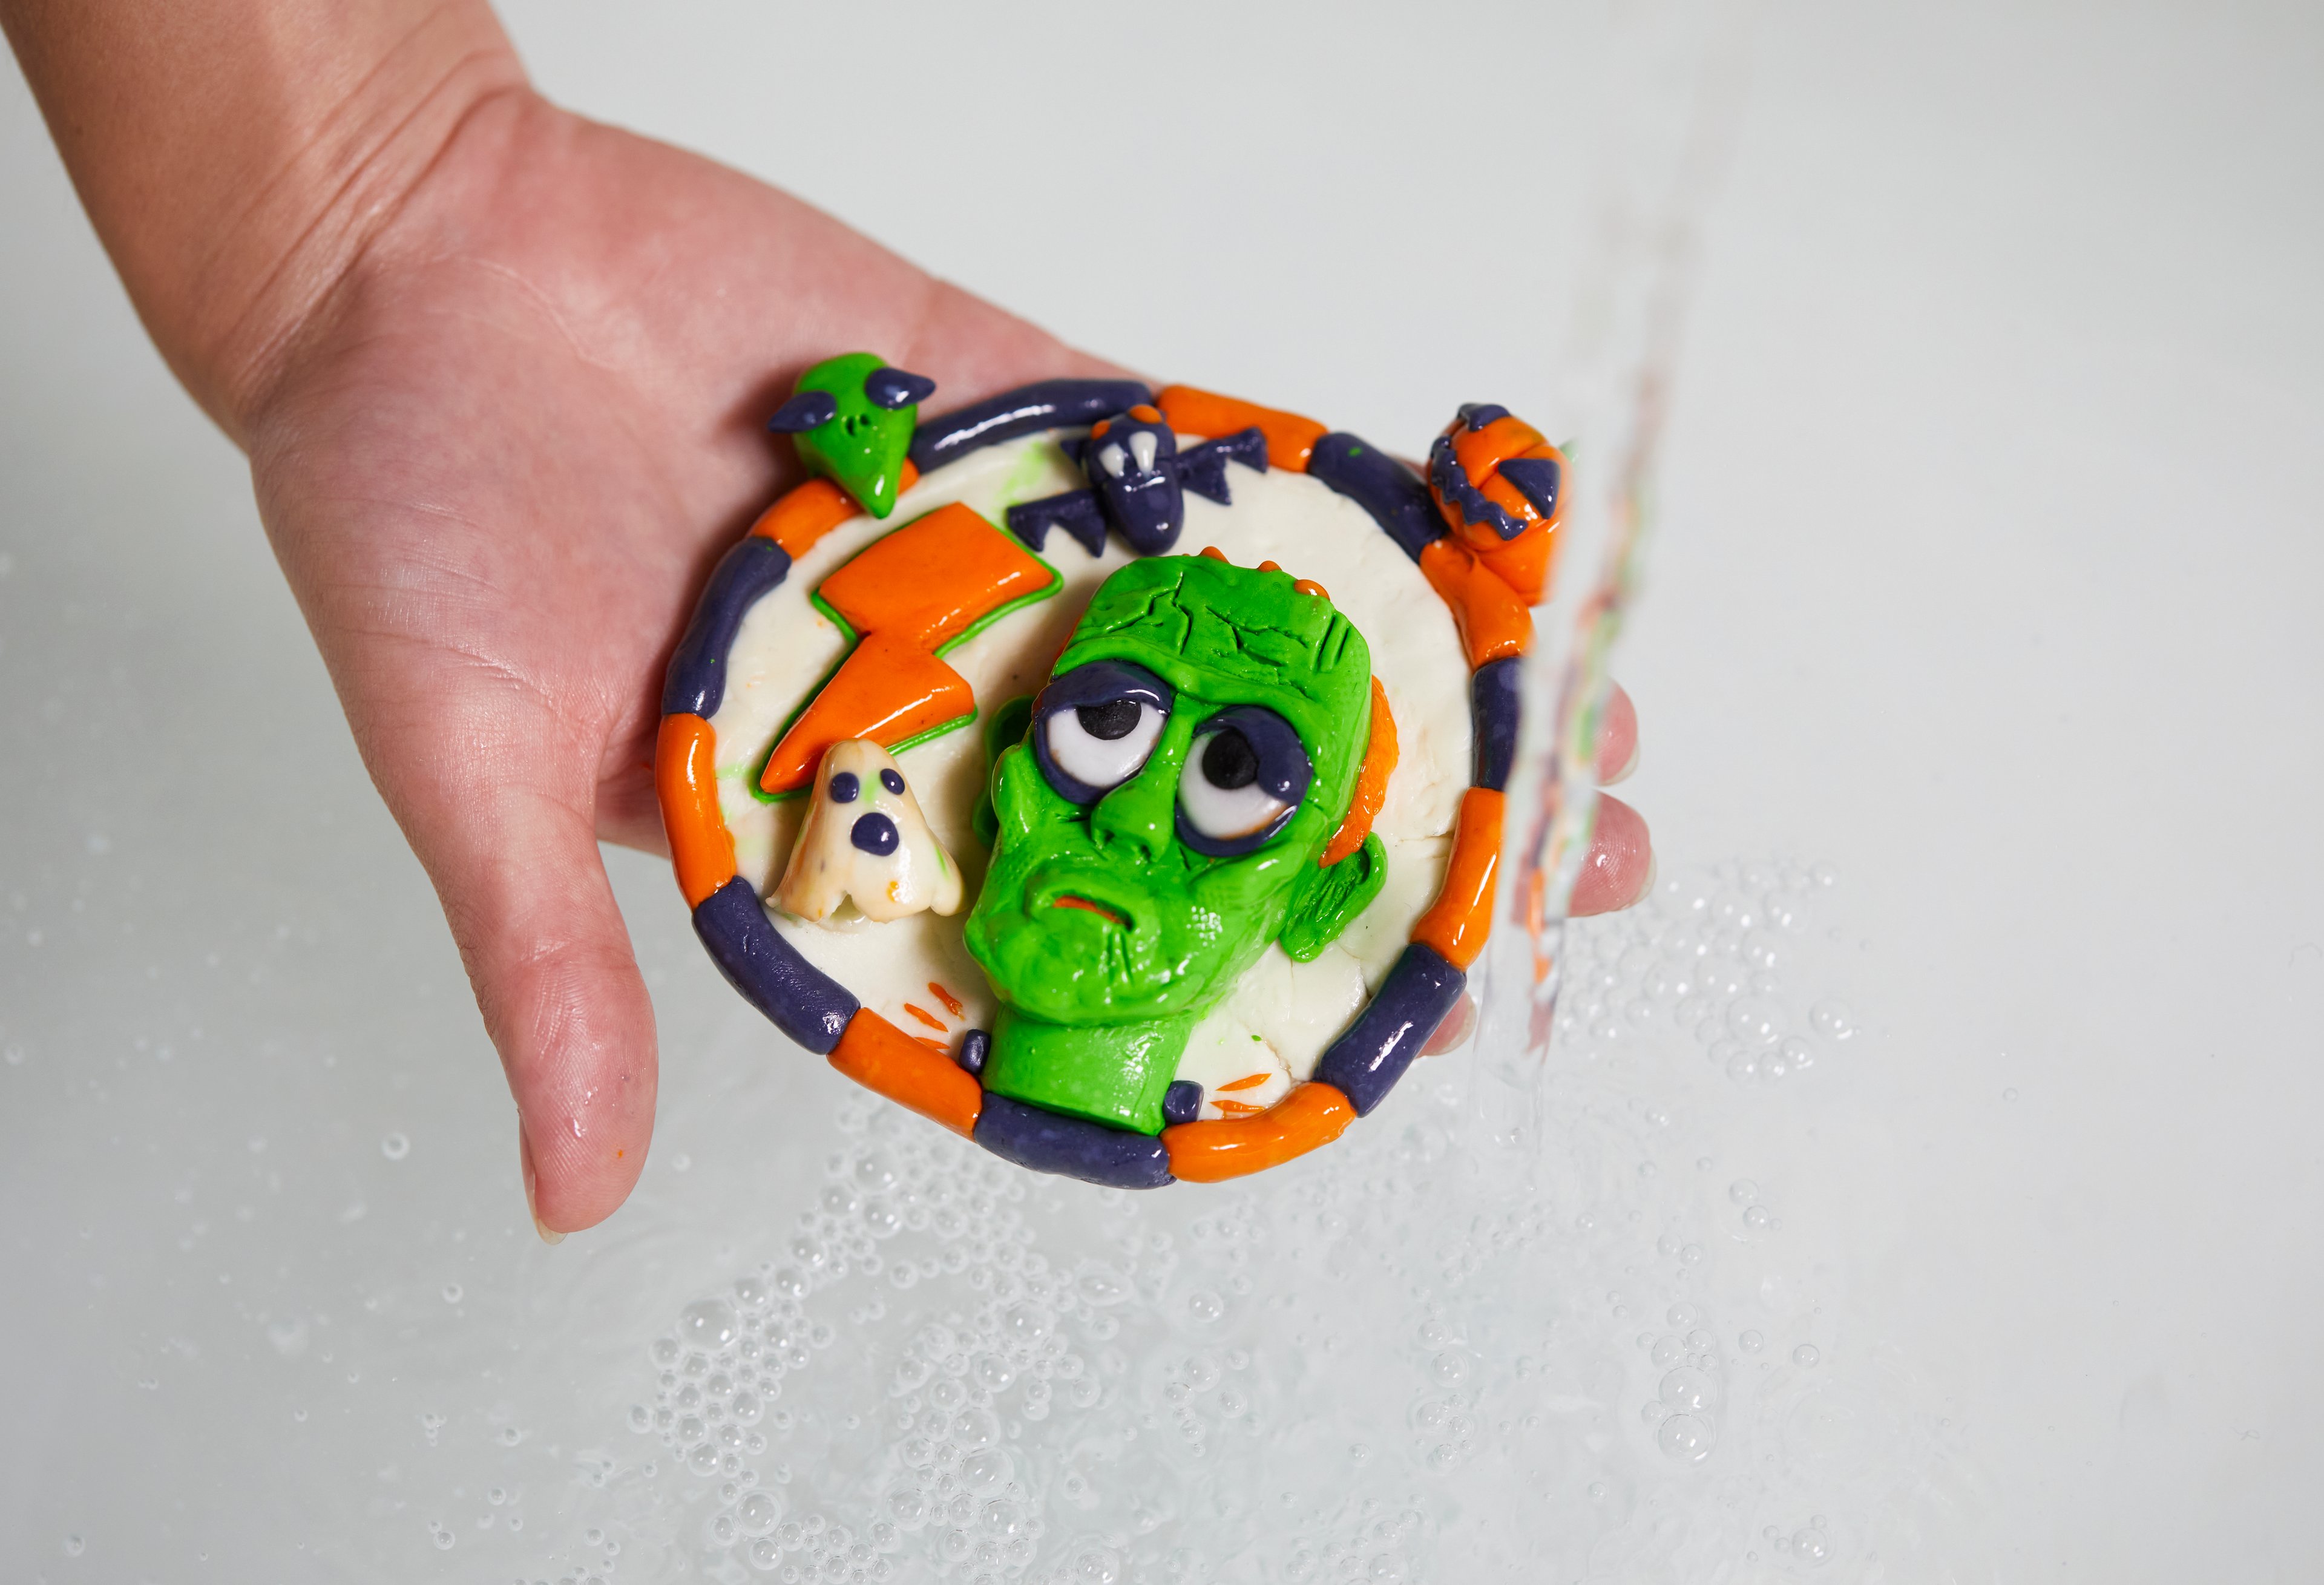 A Fun sculpted model of a green Frankenstein with orange, white and black details is held under running water.